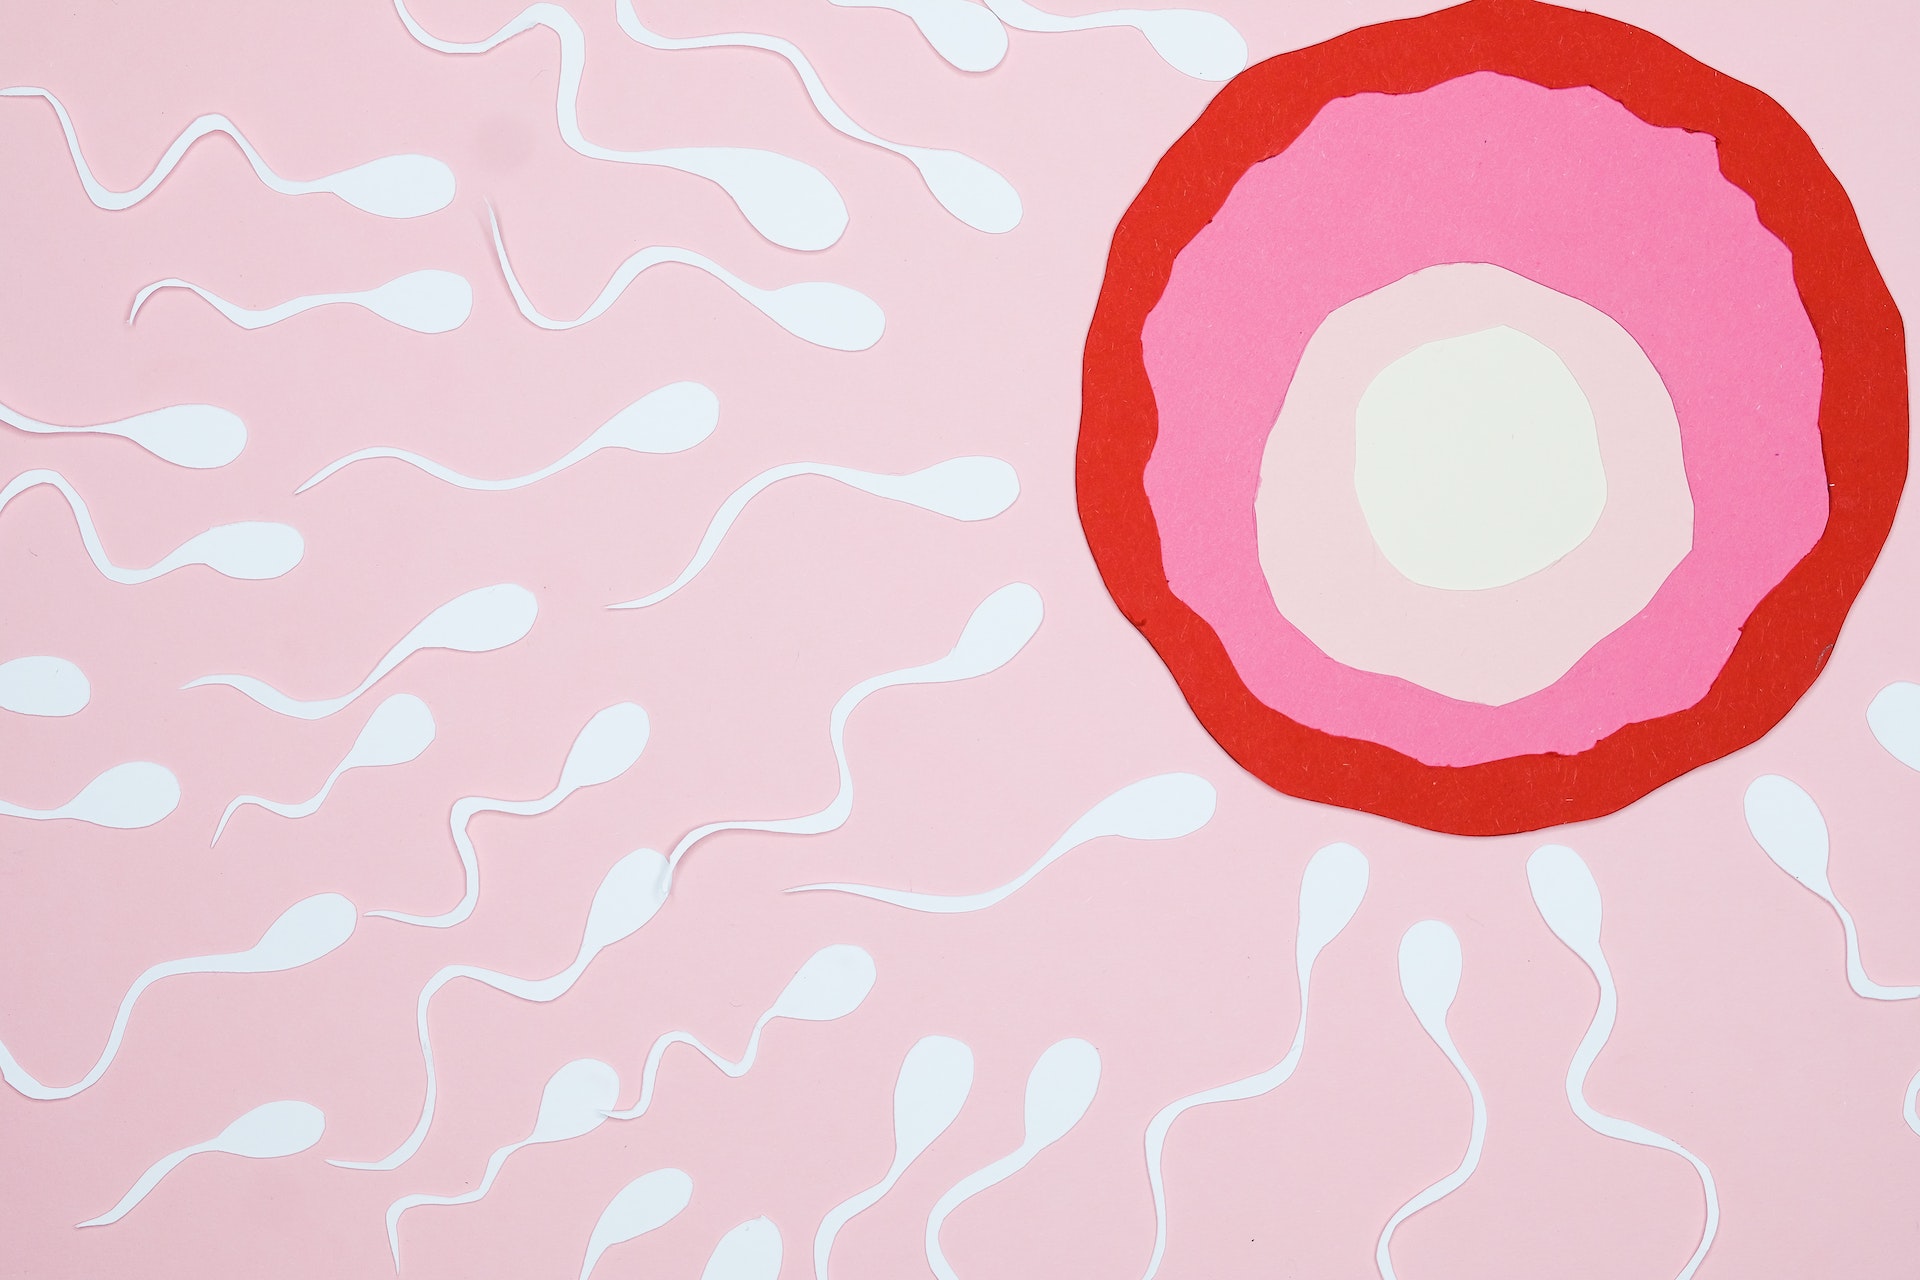 animation of sperm and egg